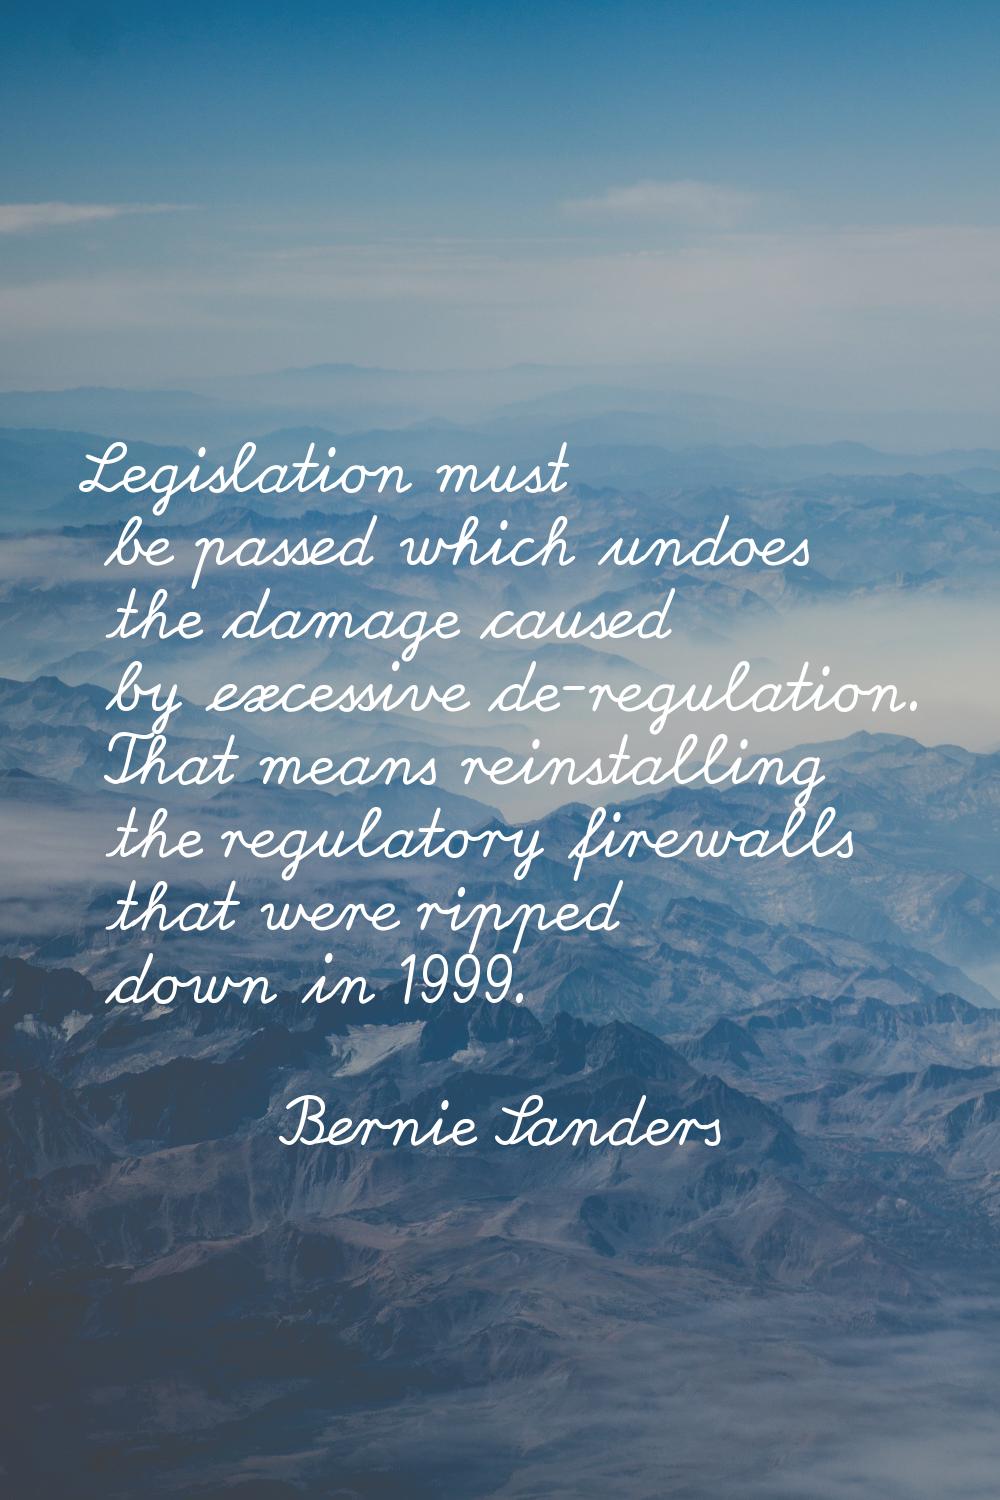 Legislation must be passed which undoes the damage caused by excessive de-regulation. That means re